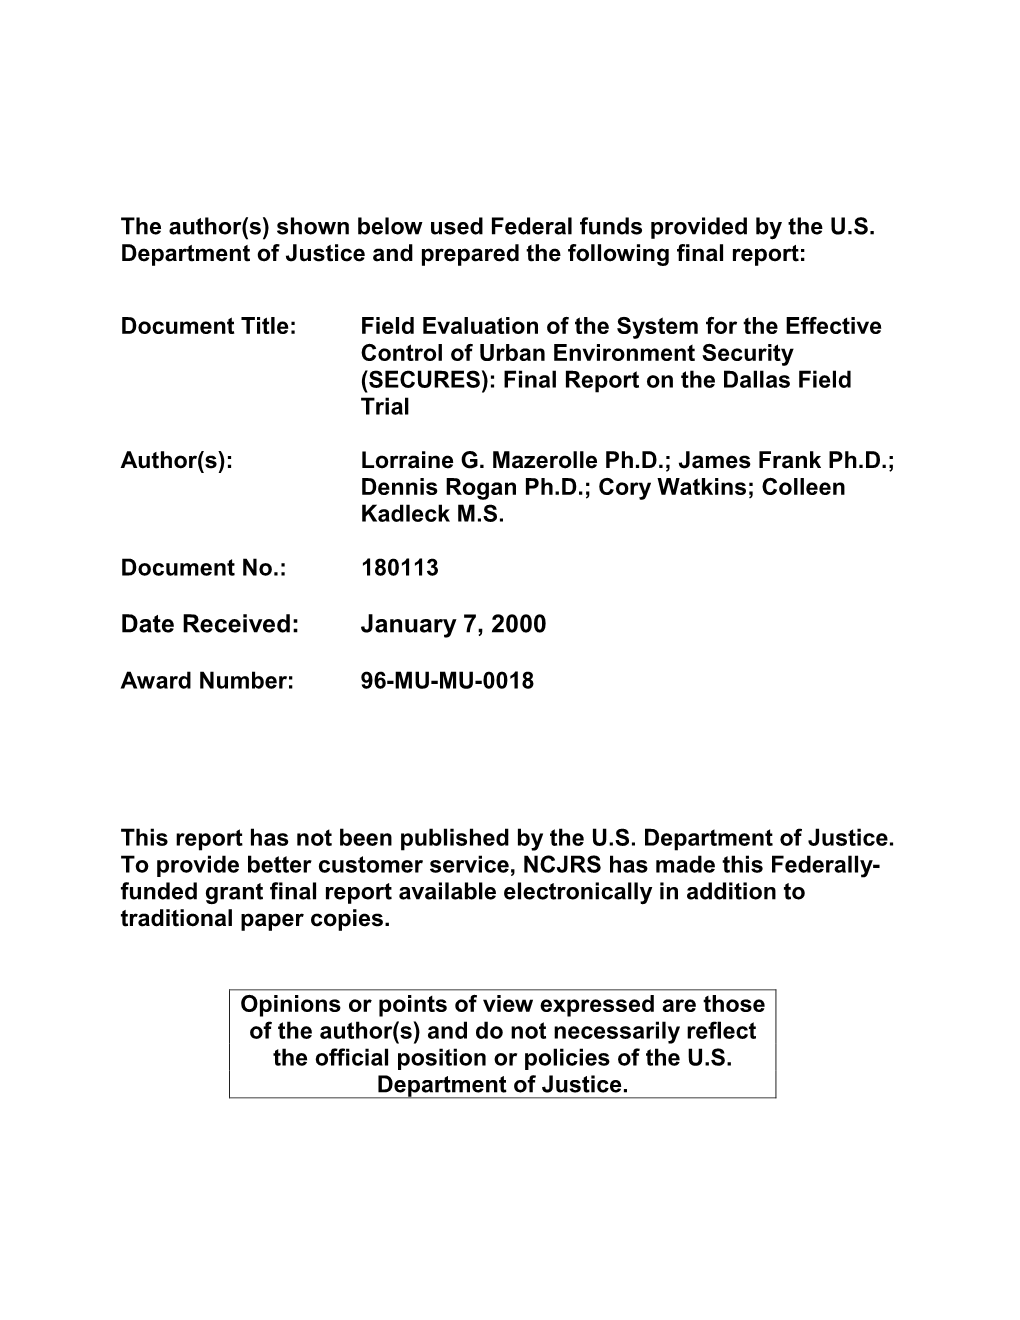 Field Evaluation of the System for the Effective Control of Urban Environment Security (SECURES): Final Report on the Dallas Field Trial